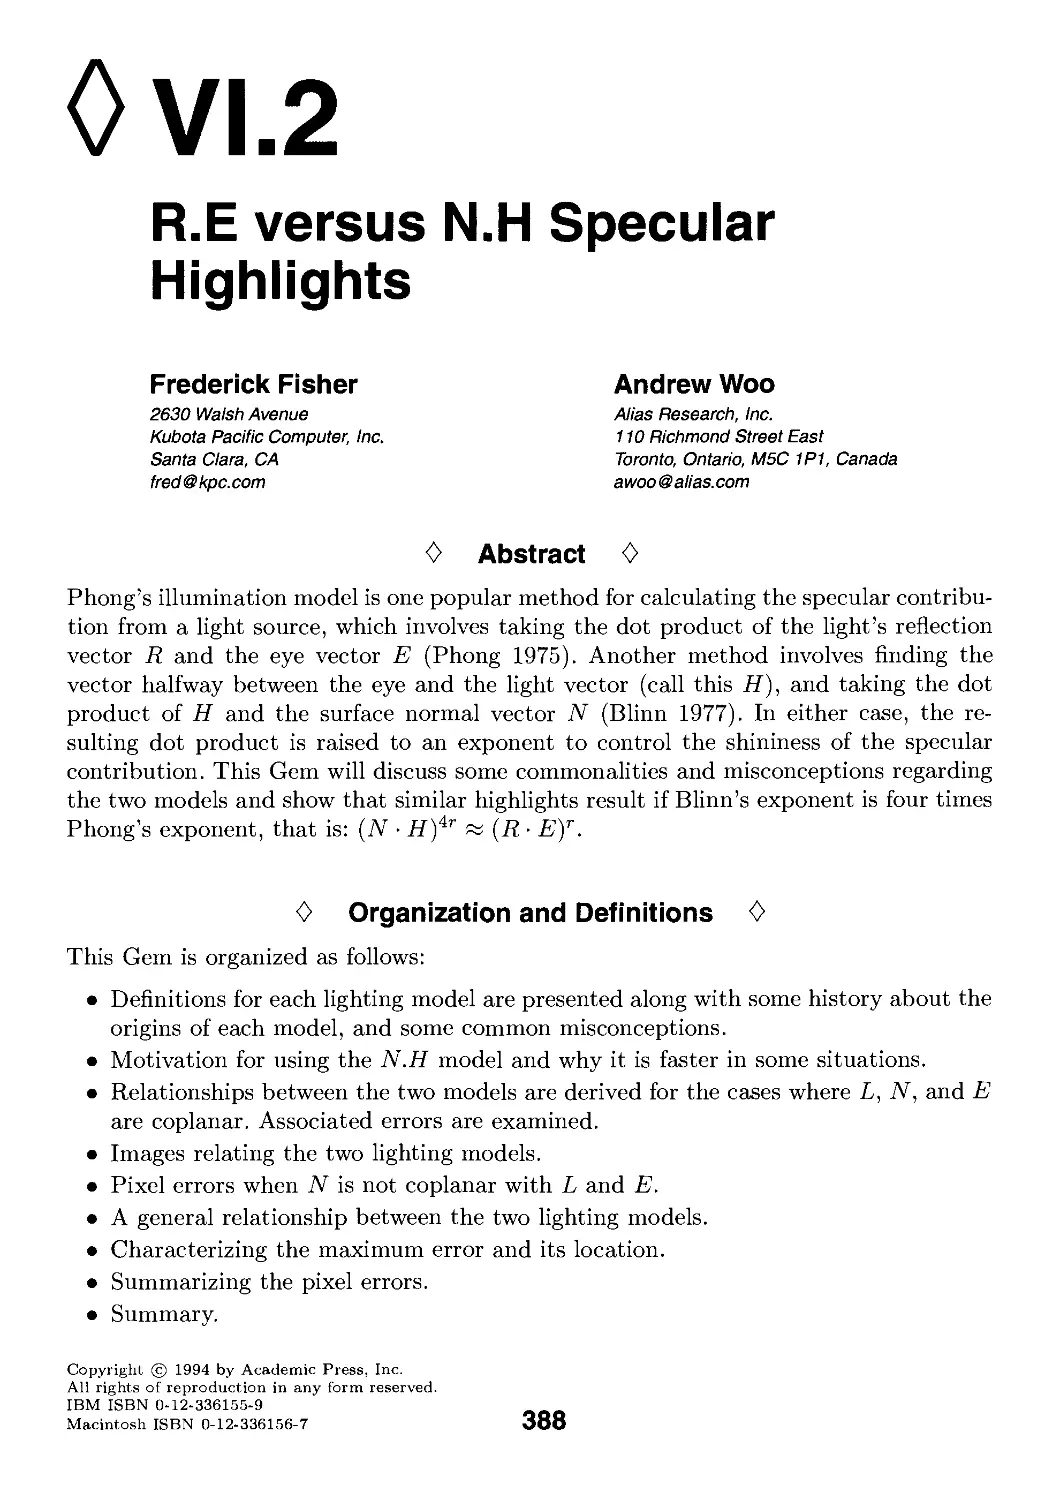 VI.2. R.E versus N.H Specular Highlights by Frederick Fisher and Andrew Woo .